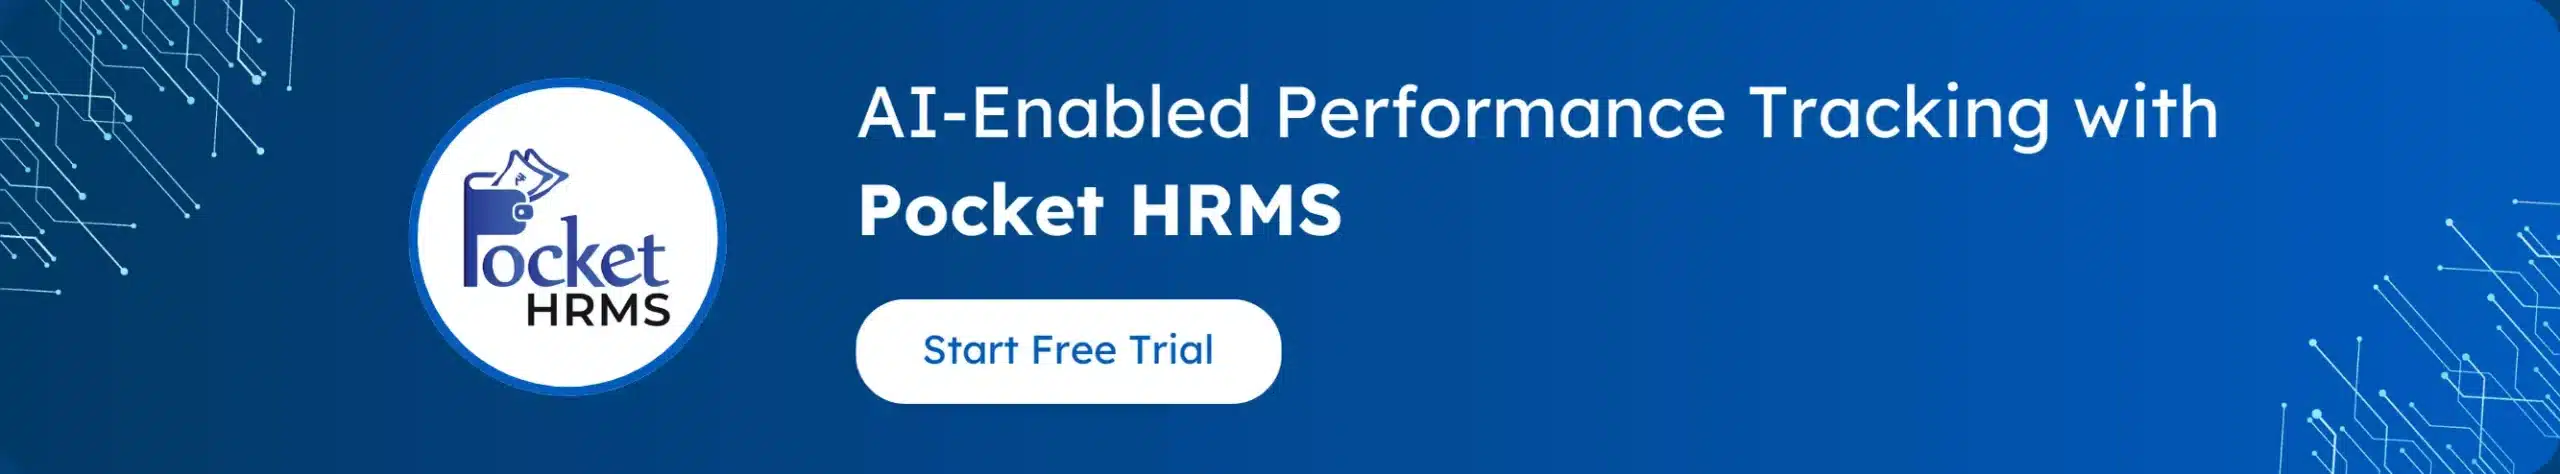 AI-Enabled Performance Tracking with Pocket HRMS